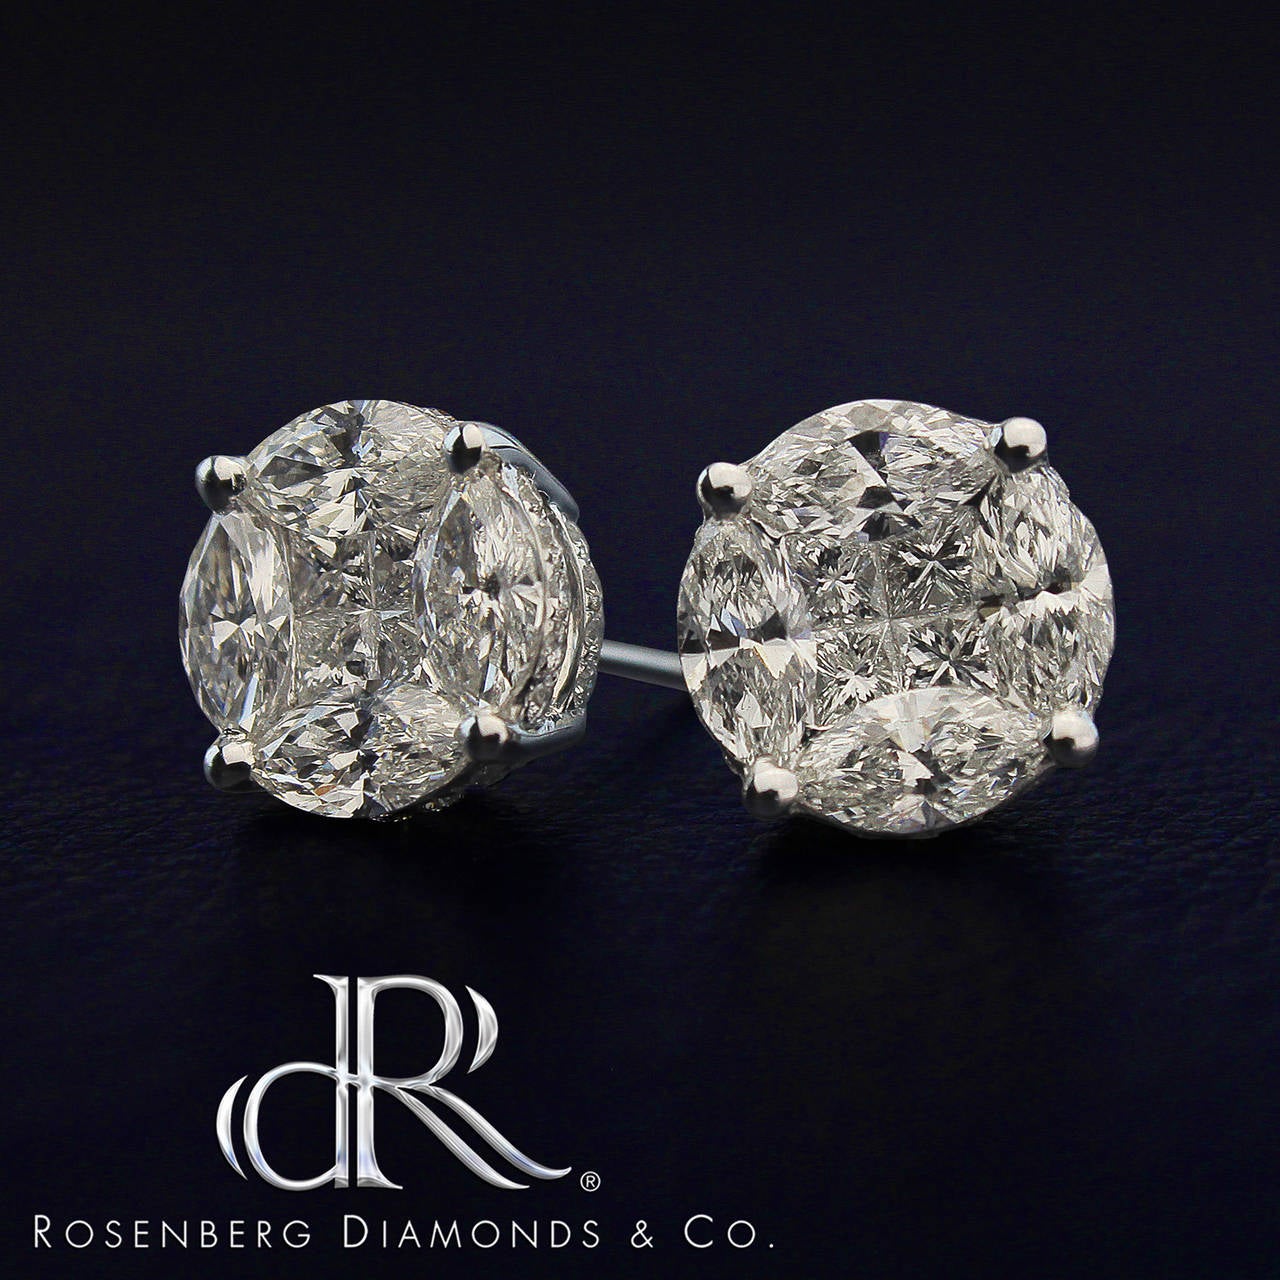 Just in time for the summer for your travels! This beautiful matched pair of diamond illusion studs just under 5ct tw with high quality collection goods, for less than one tenth of the price of single solitaire diamond studs. We also offer the same